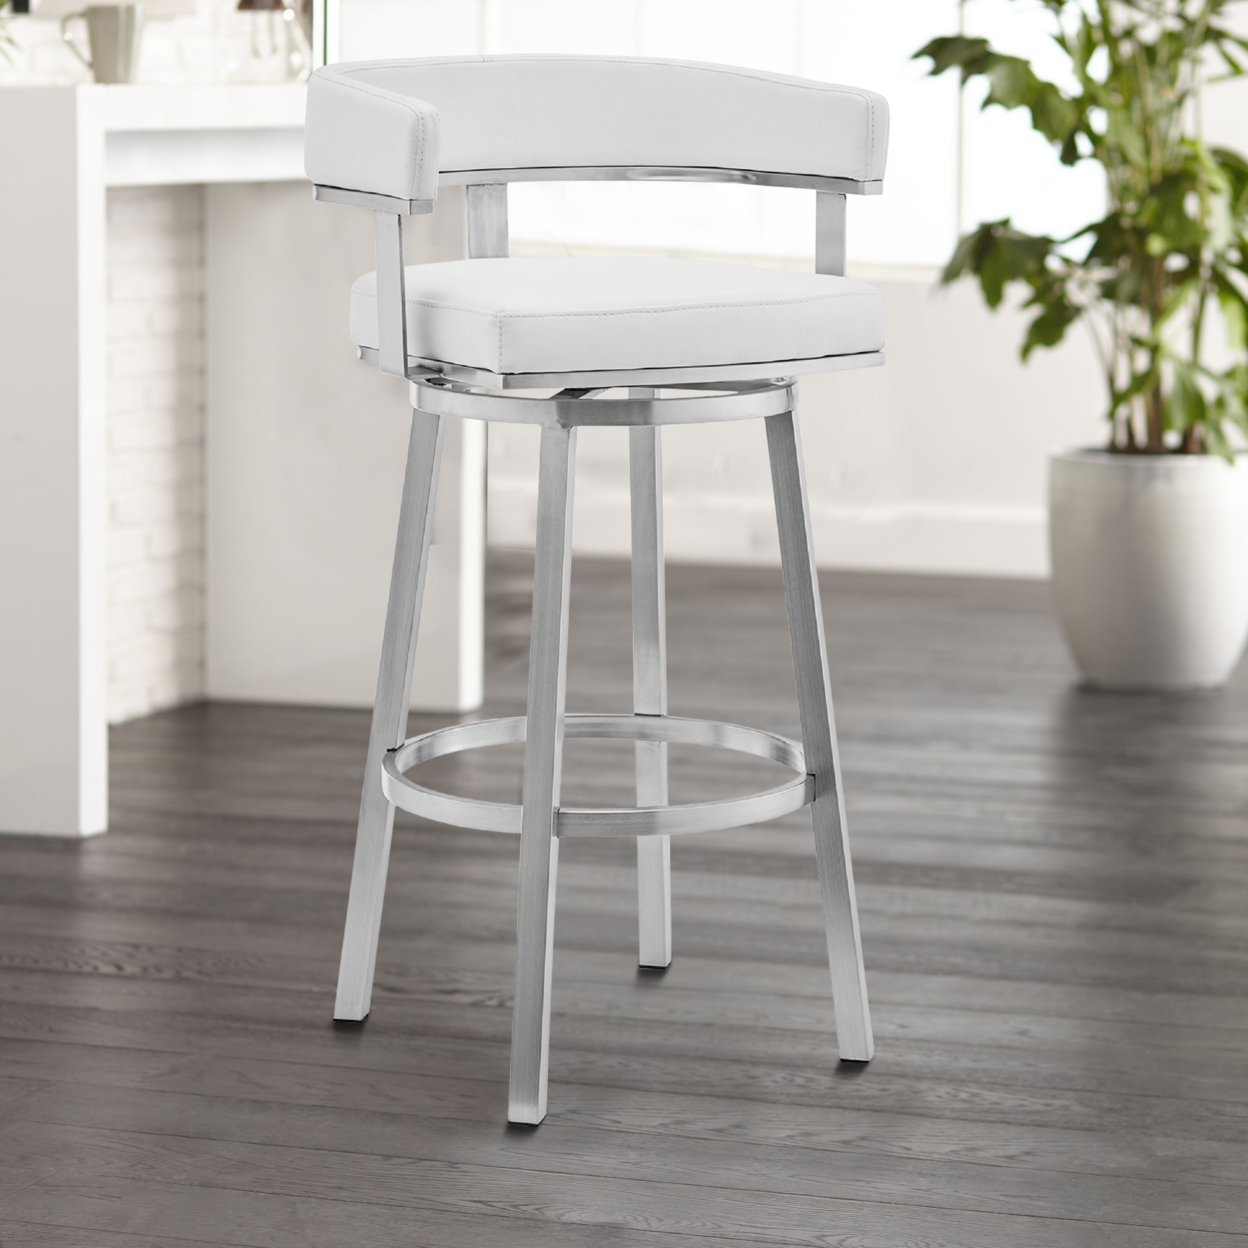 Swivel Barstool With Curved Open Back And Metal Legs, White And Silver- Saltoro Sherpi